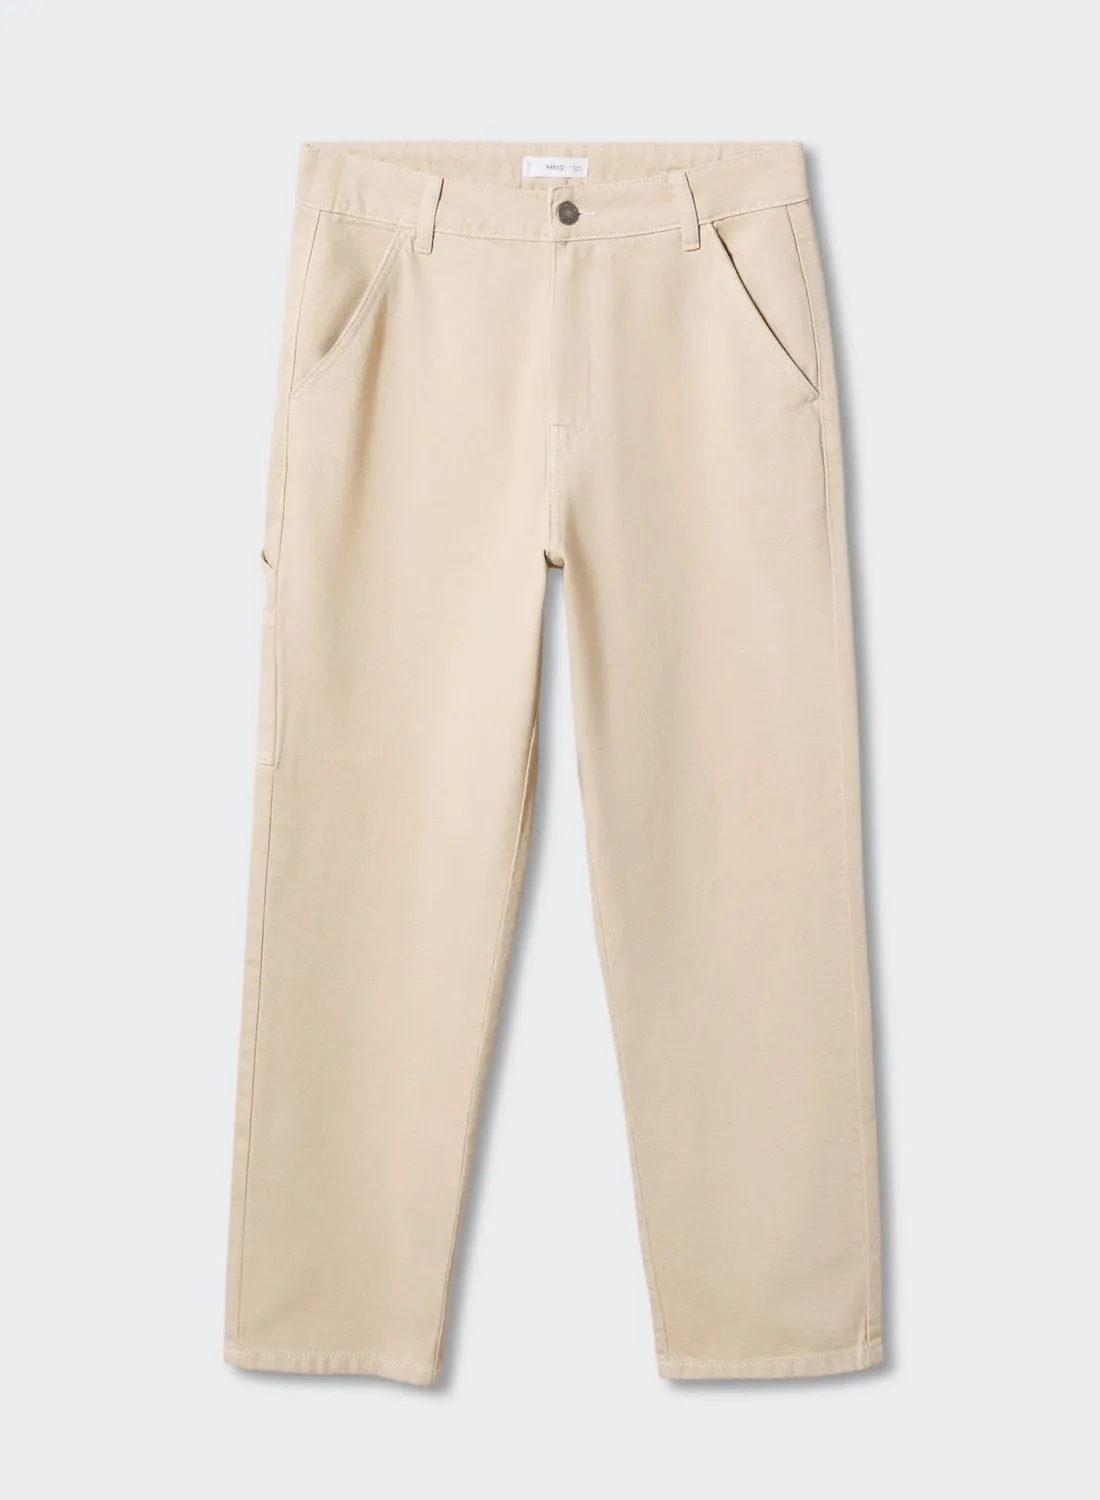 MANGO Youth Essential Trousers